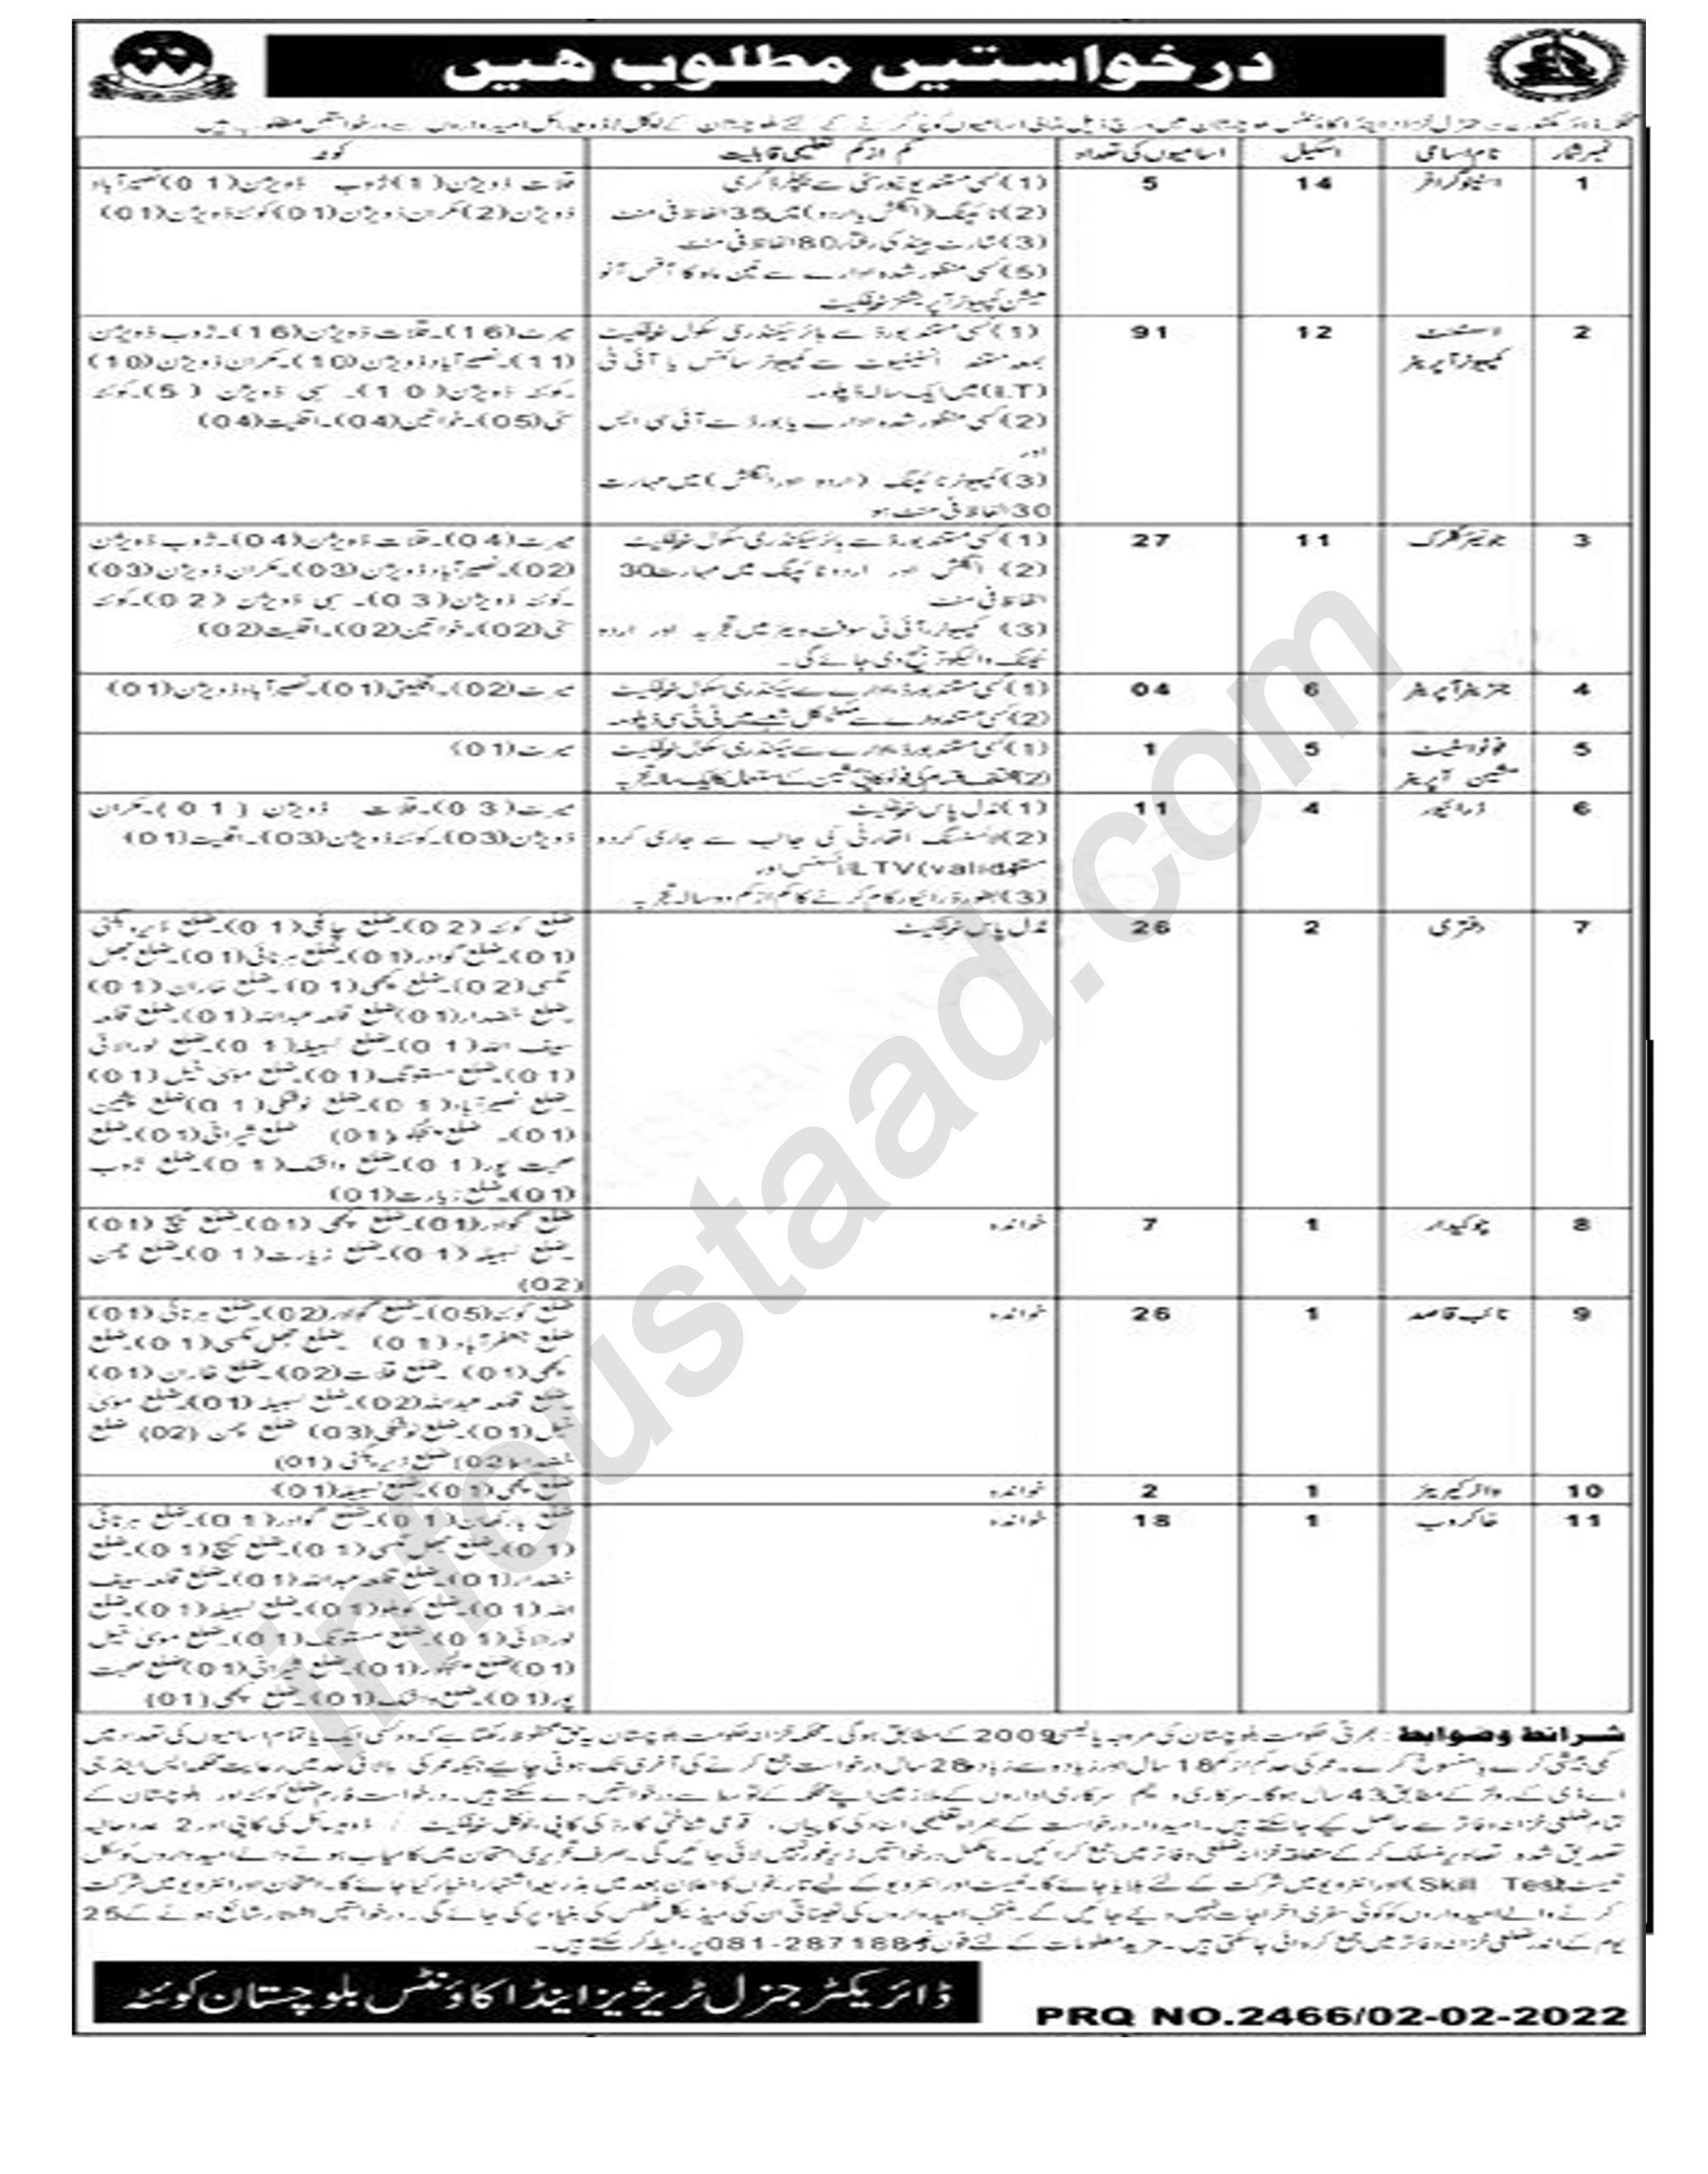 Today govt jobs in Pakistan 2022 February Treasury and Accounts Department Jobs in Balochistan 2022 February